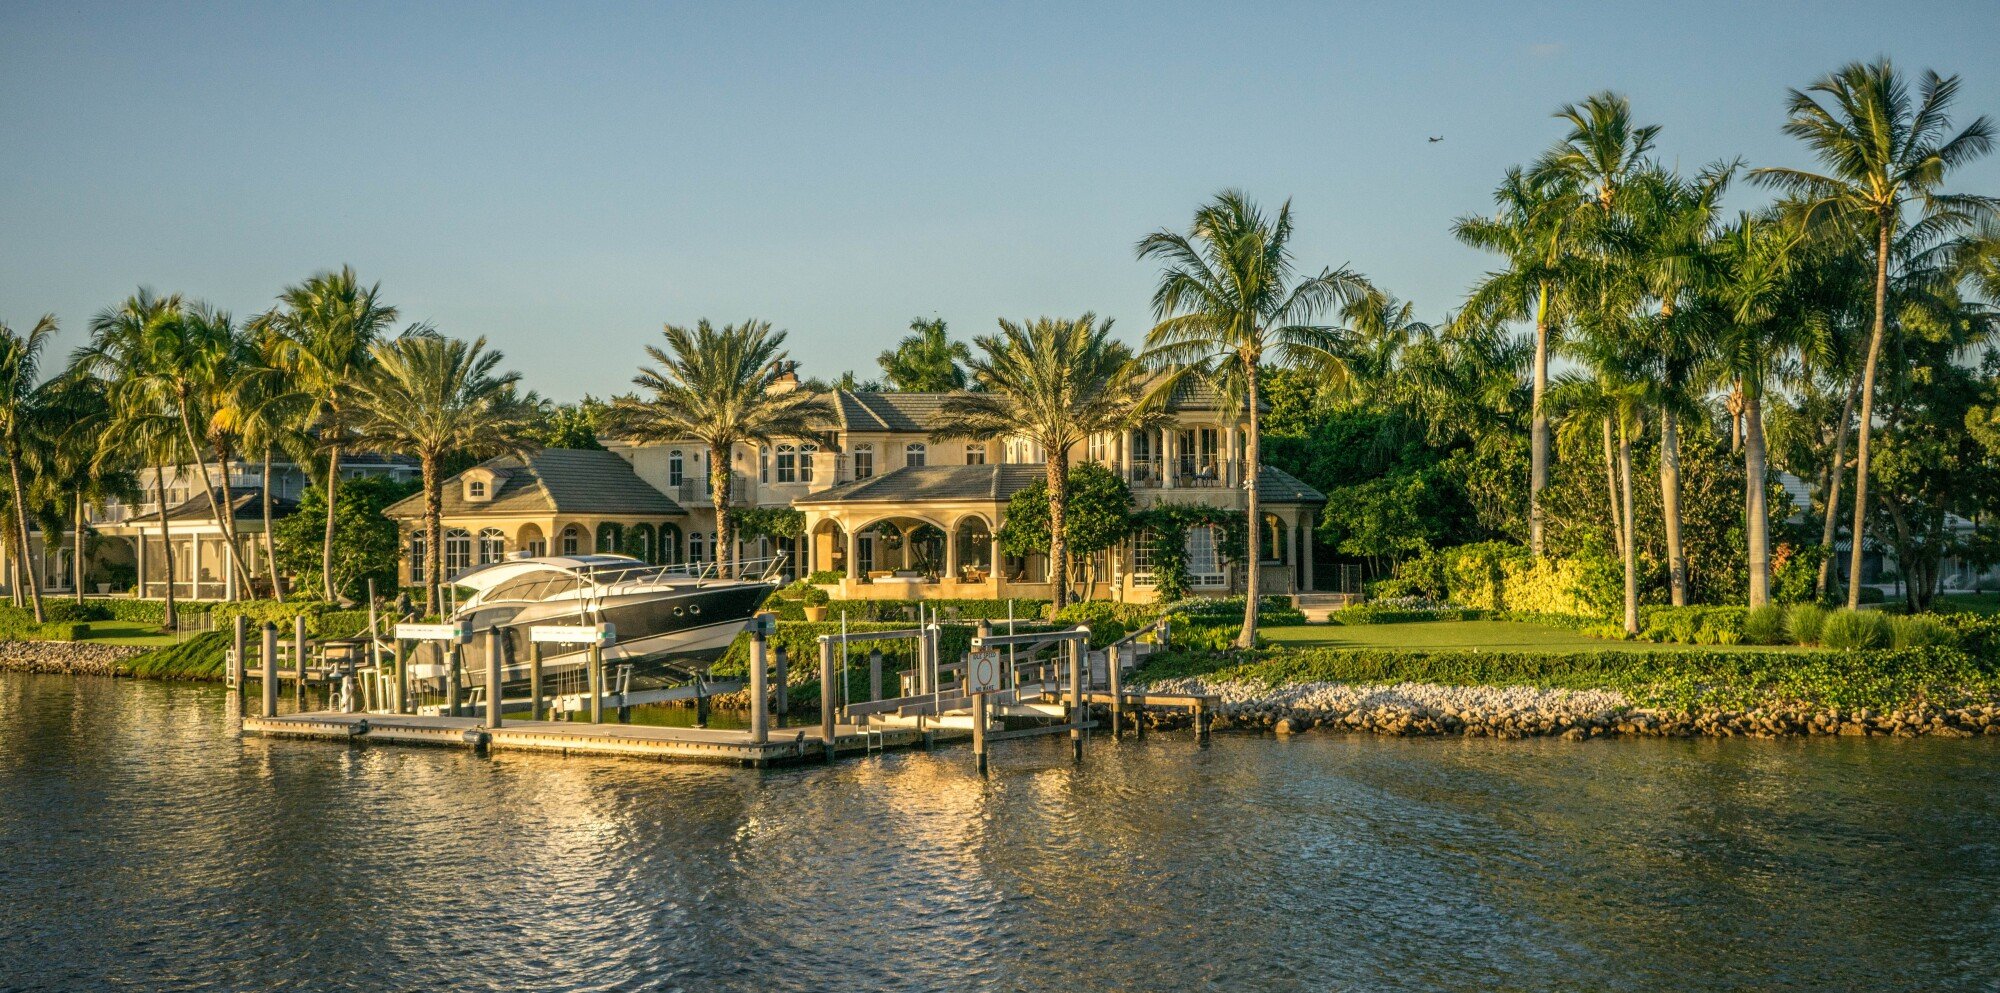 How Can You Select the Best HOA Management Companies in Naples, FL?